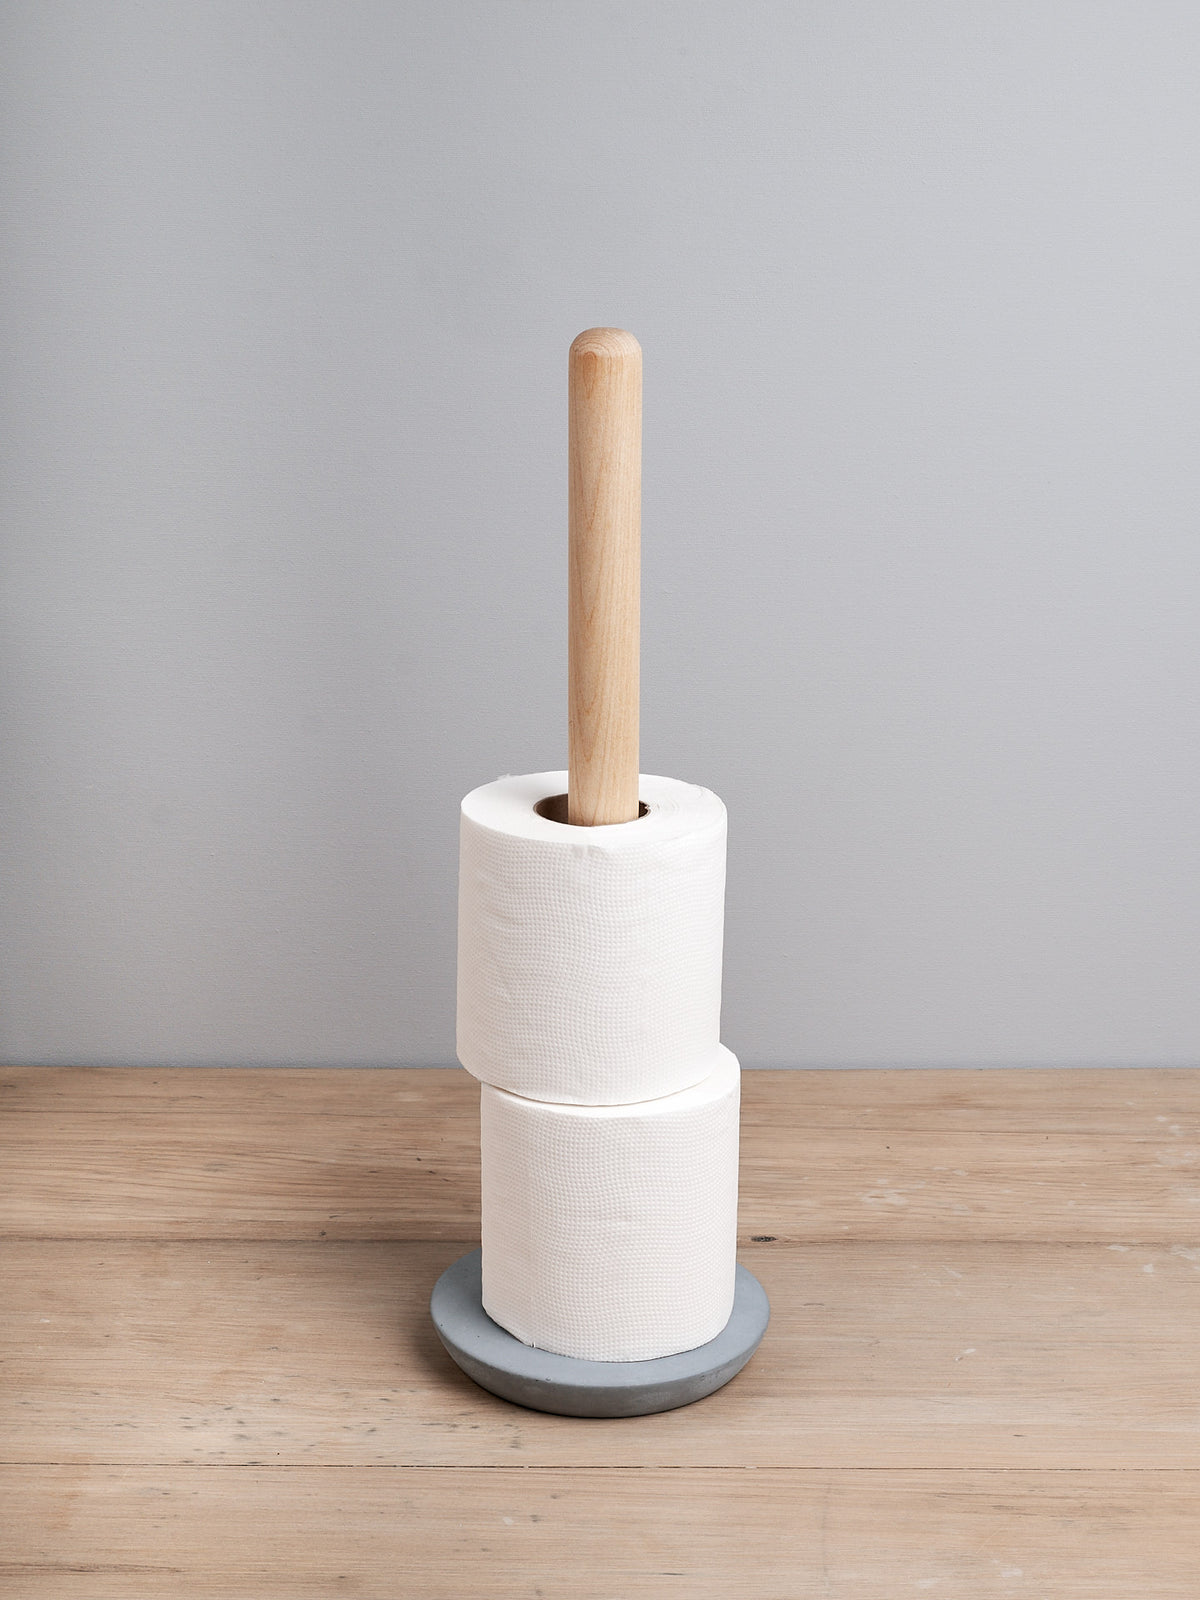 A roll of paper towels on an Iris Hantverk Toilet Brush + Toilet Roll Holder Set against a grey background.